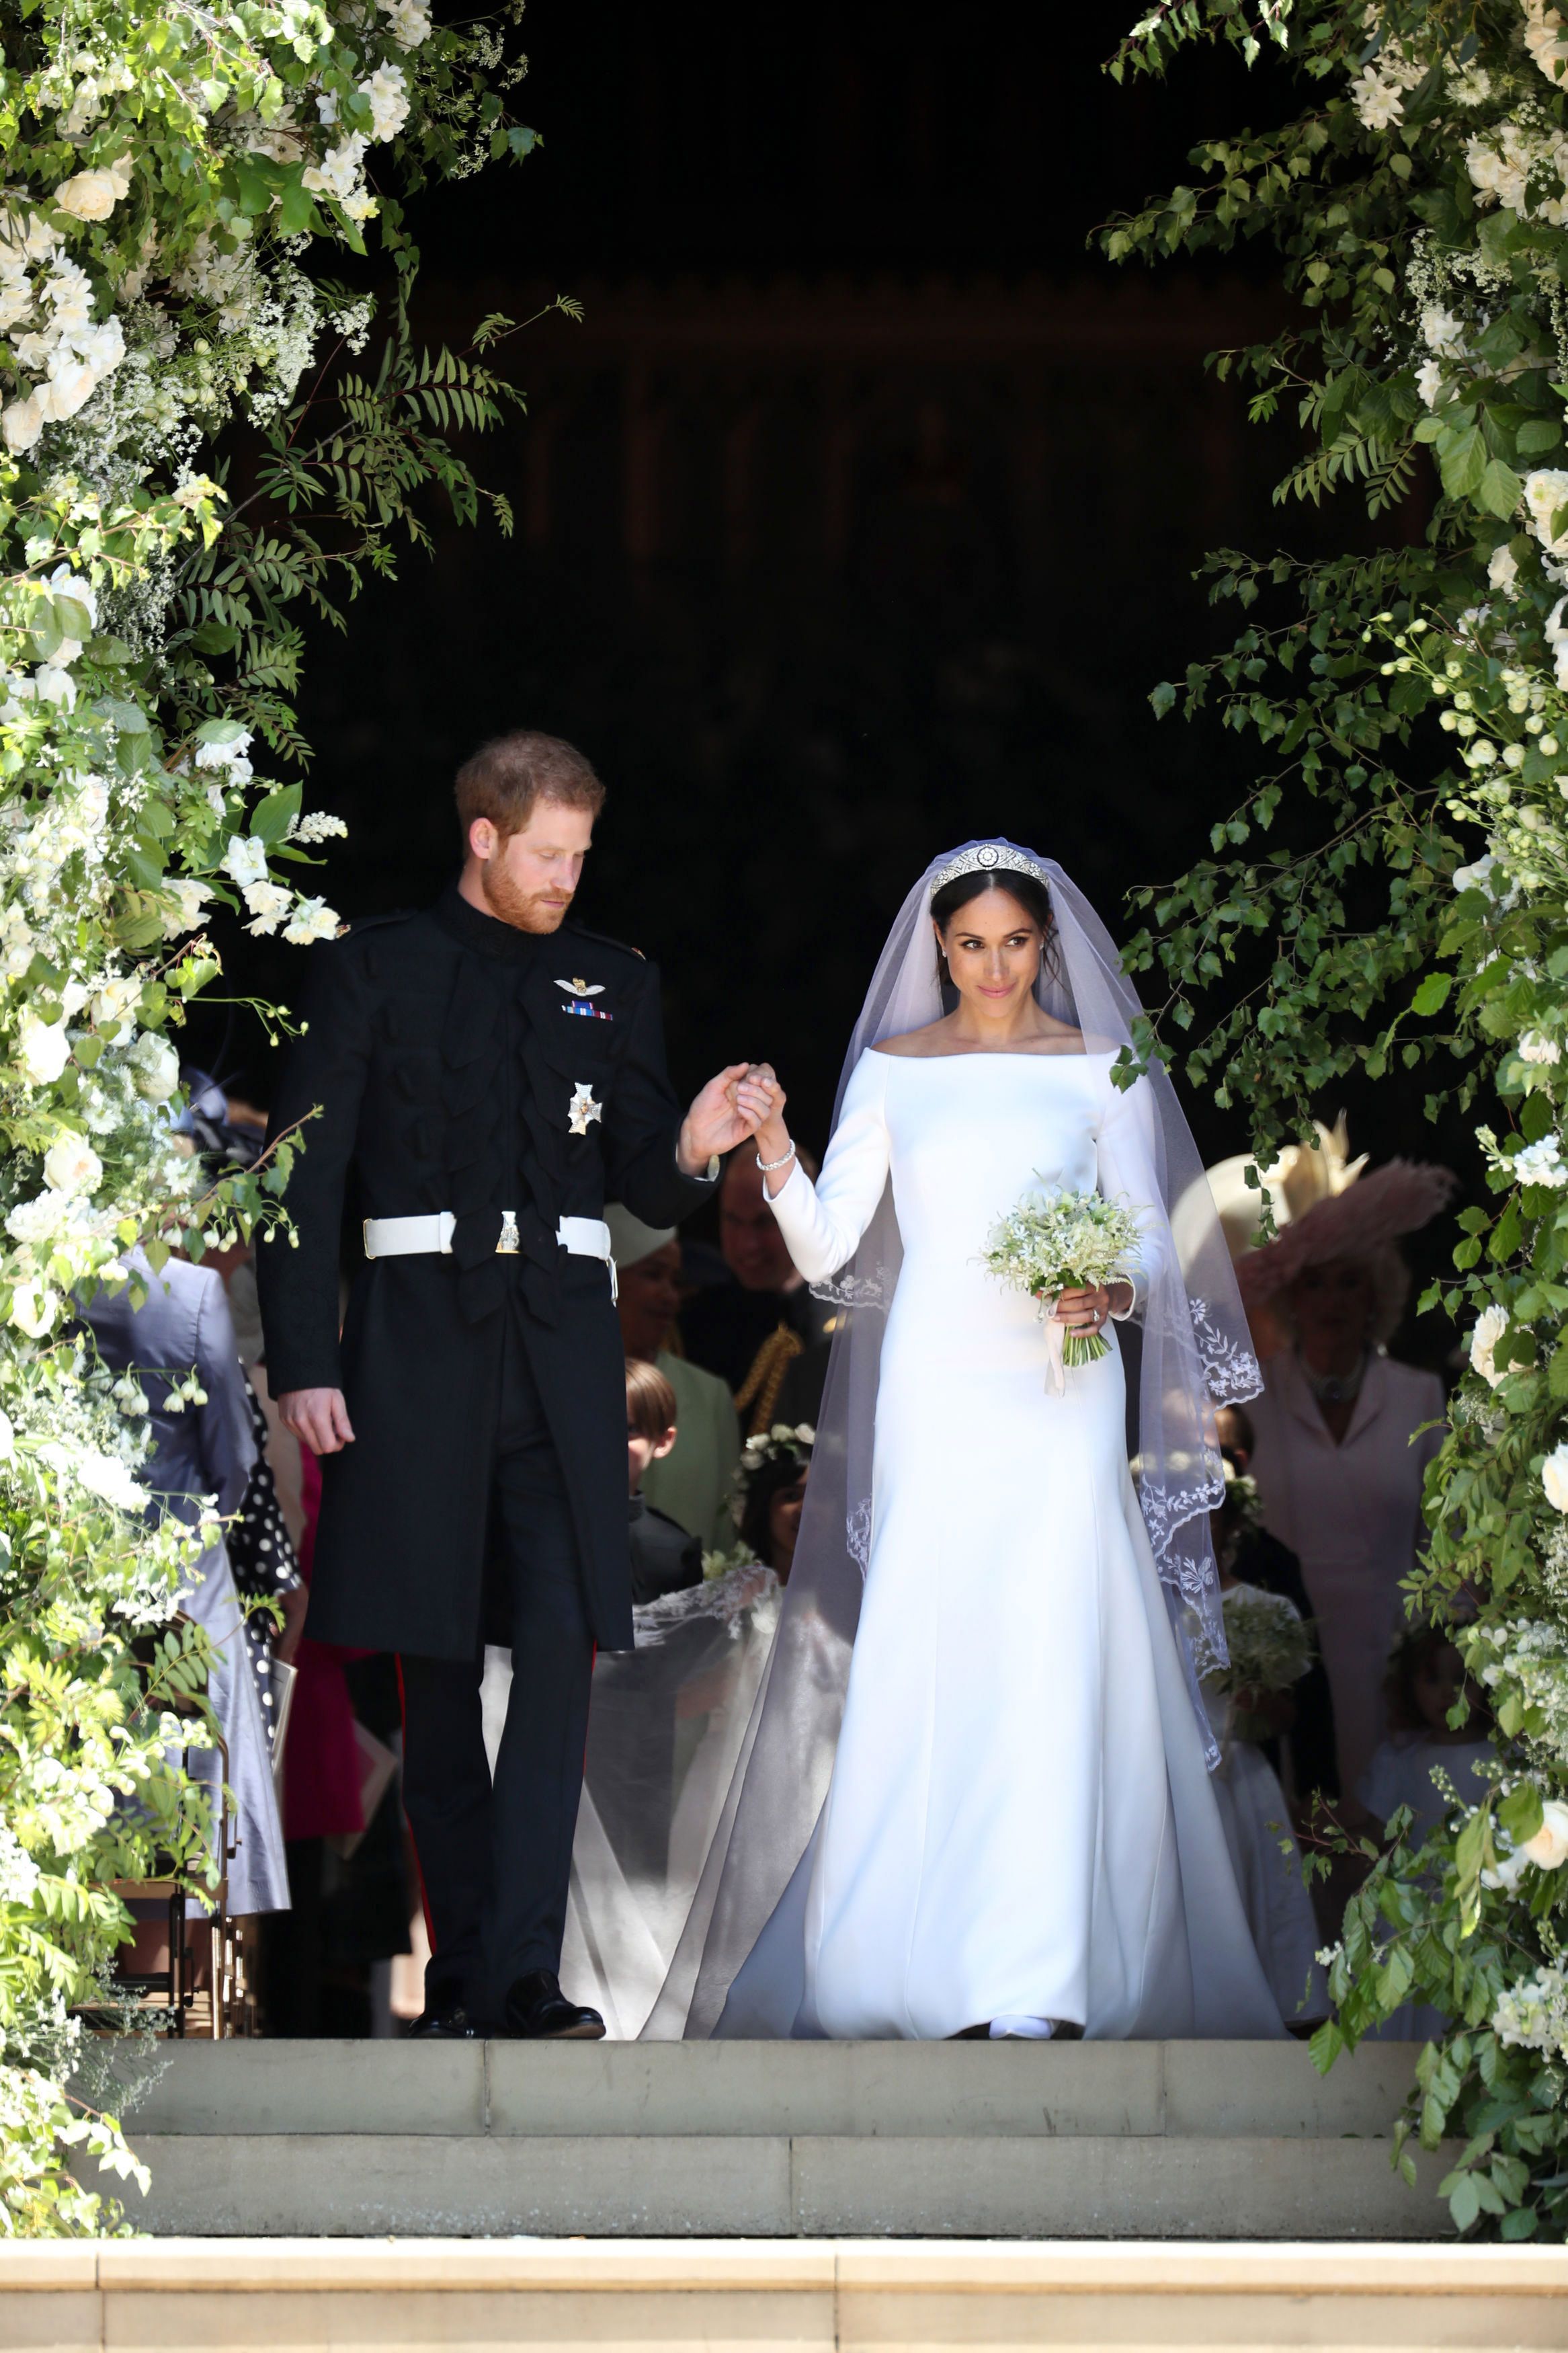 Bridal Experts Predict What Meghan Markle Will Wear on Her Wedding Day   Fashionista